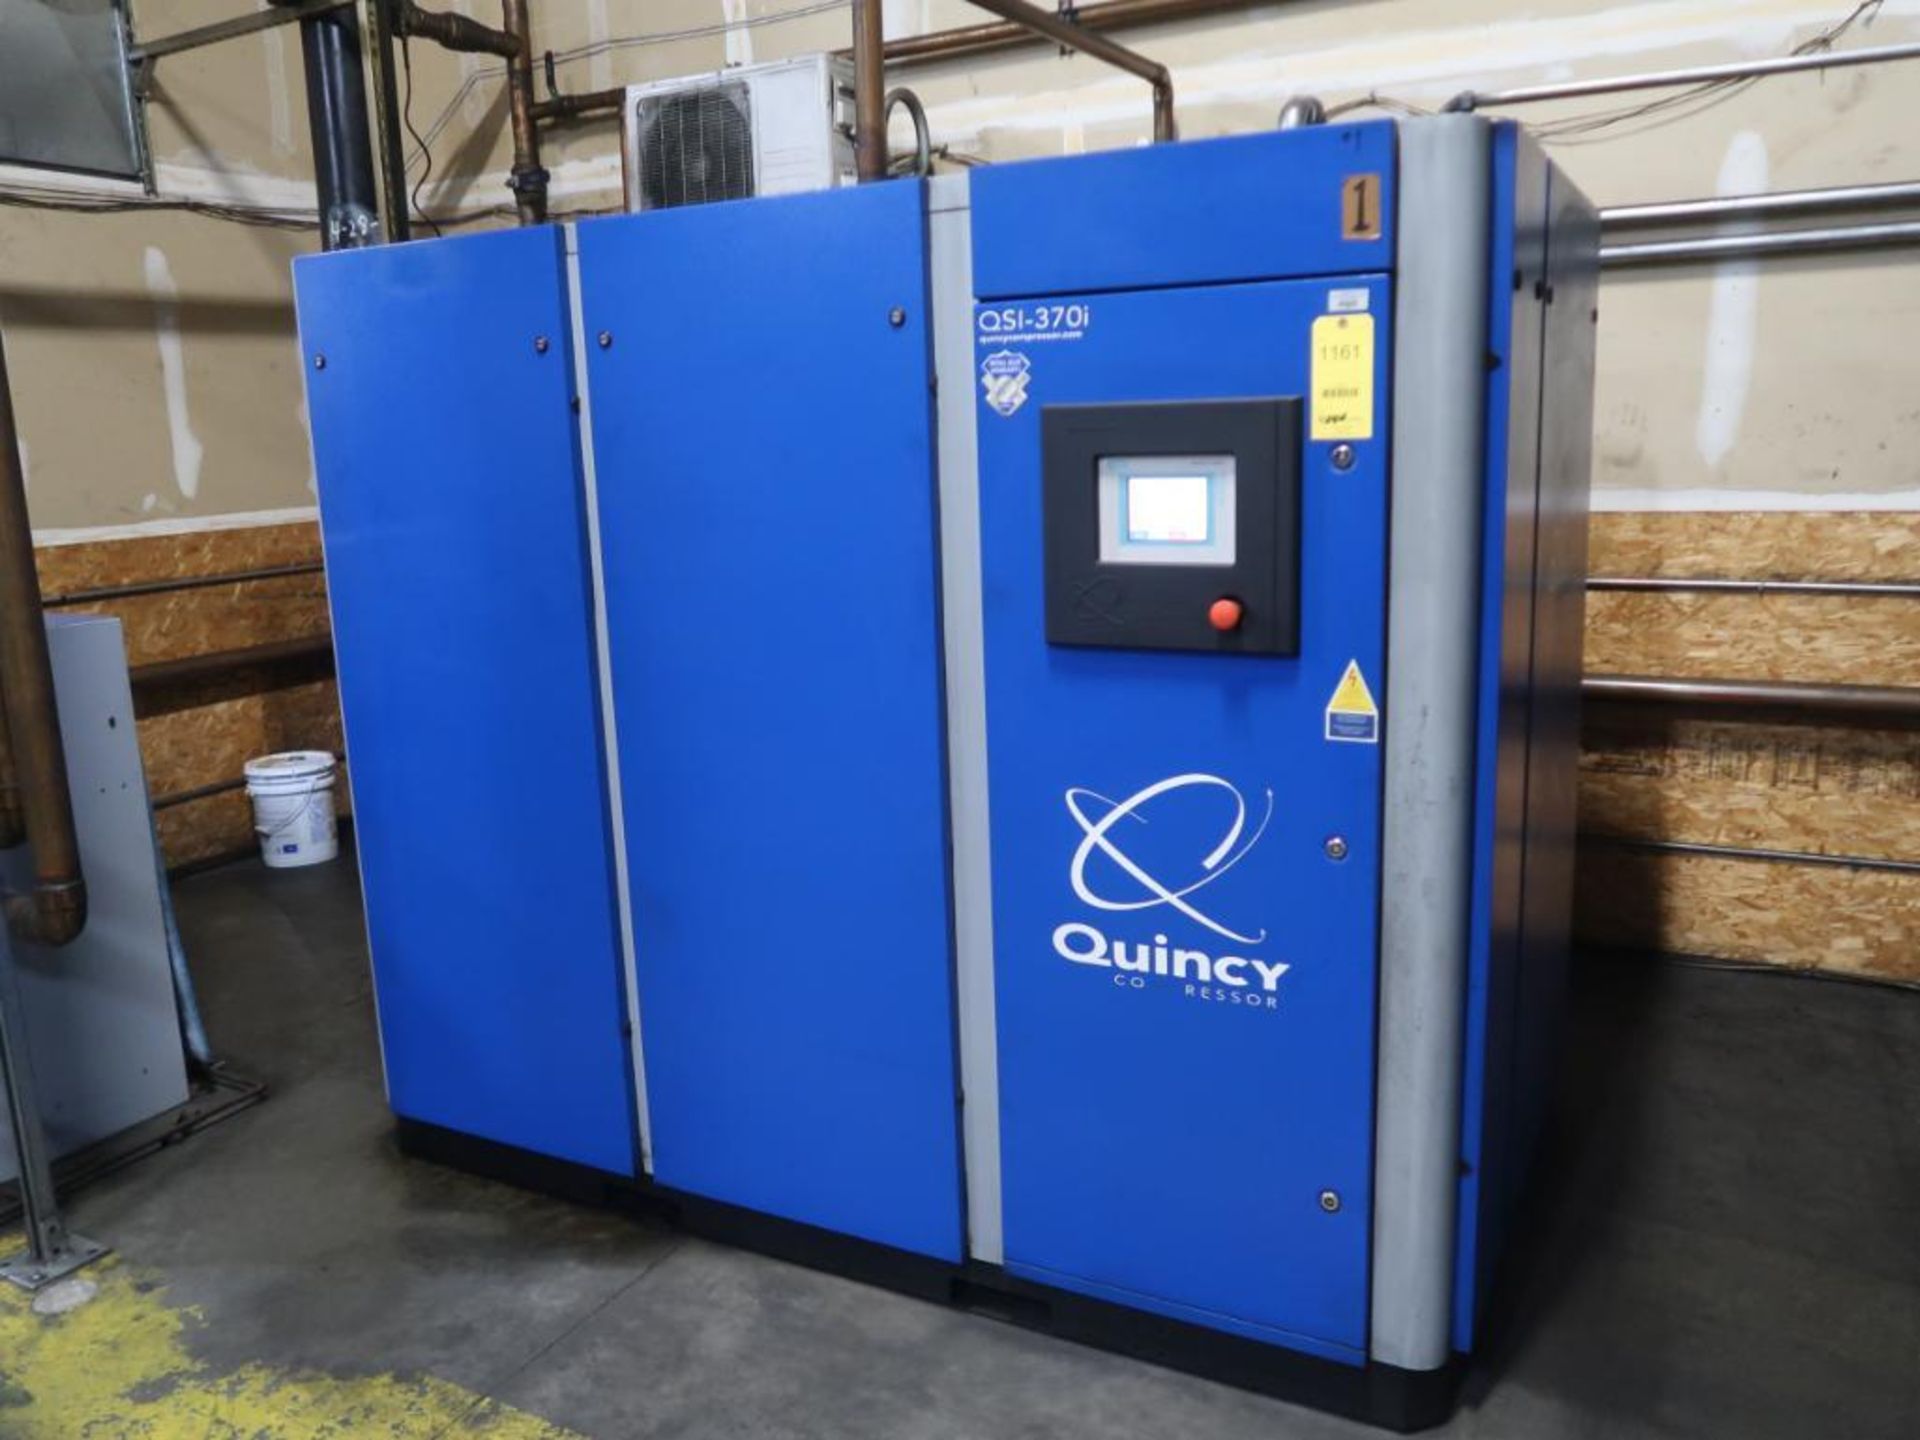 Quincy Model QSI370 Rotary Screw Air Compressors, S/N 1104270126, Total Hours Indicated 10935 (